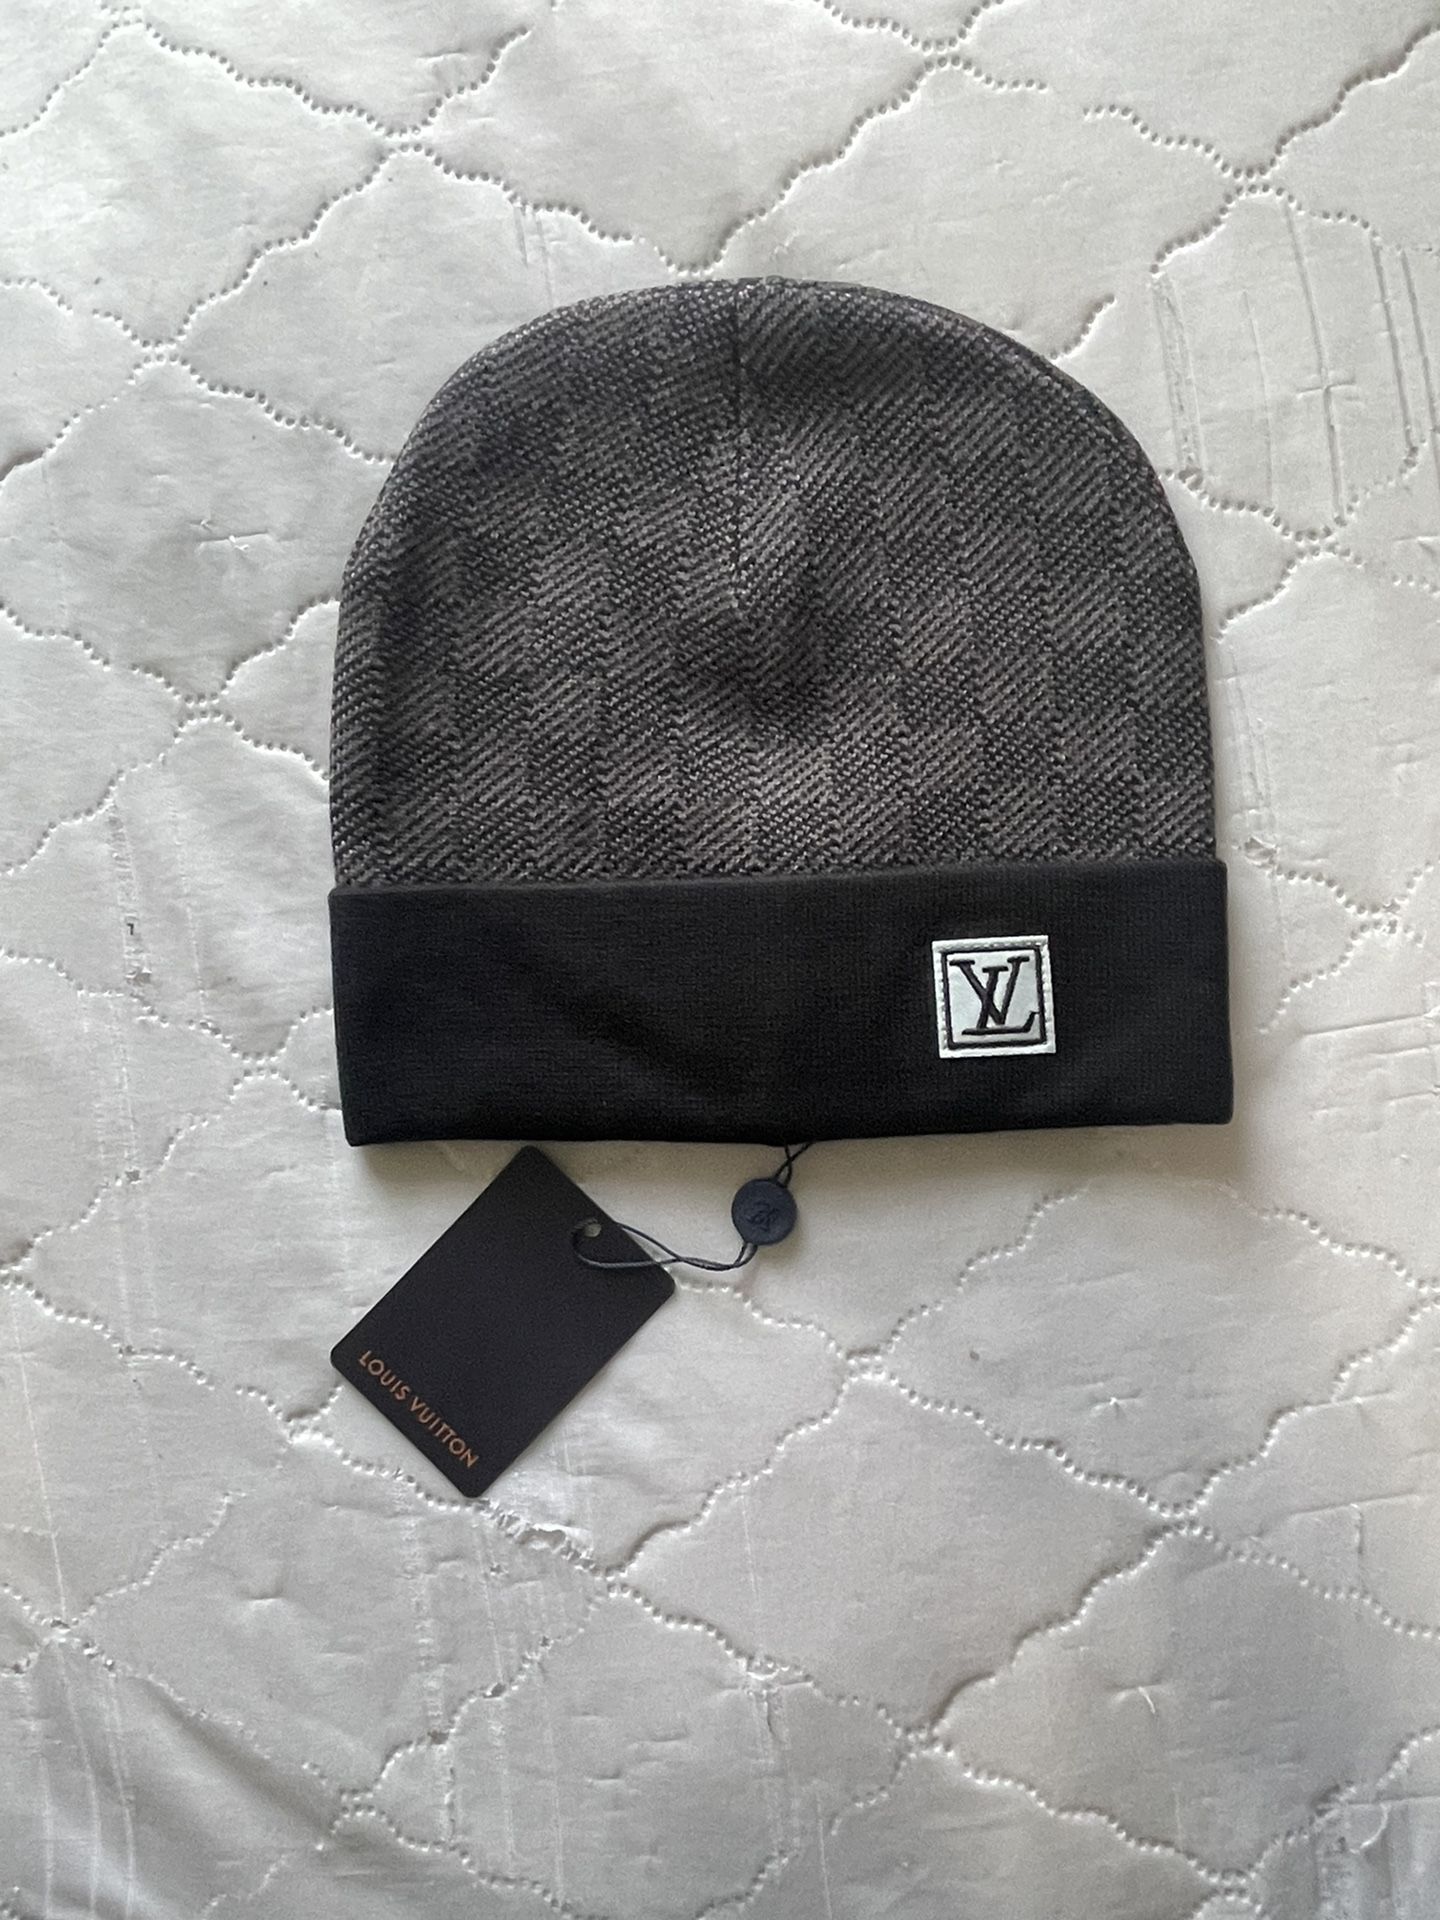 louis vuitton beanie grey for Sale in Longmont, CO - OfferUp